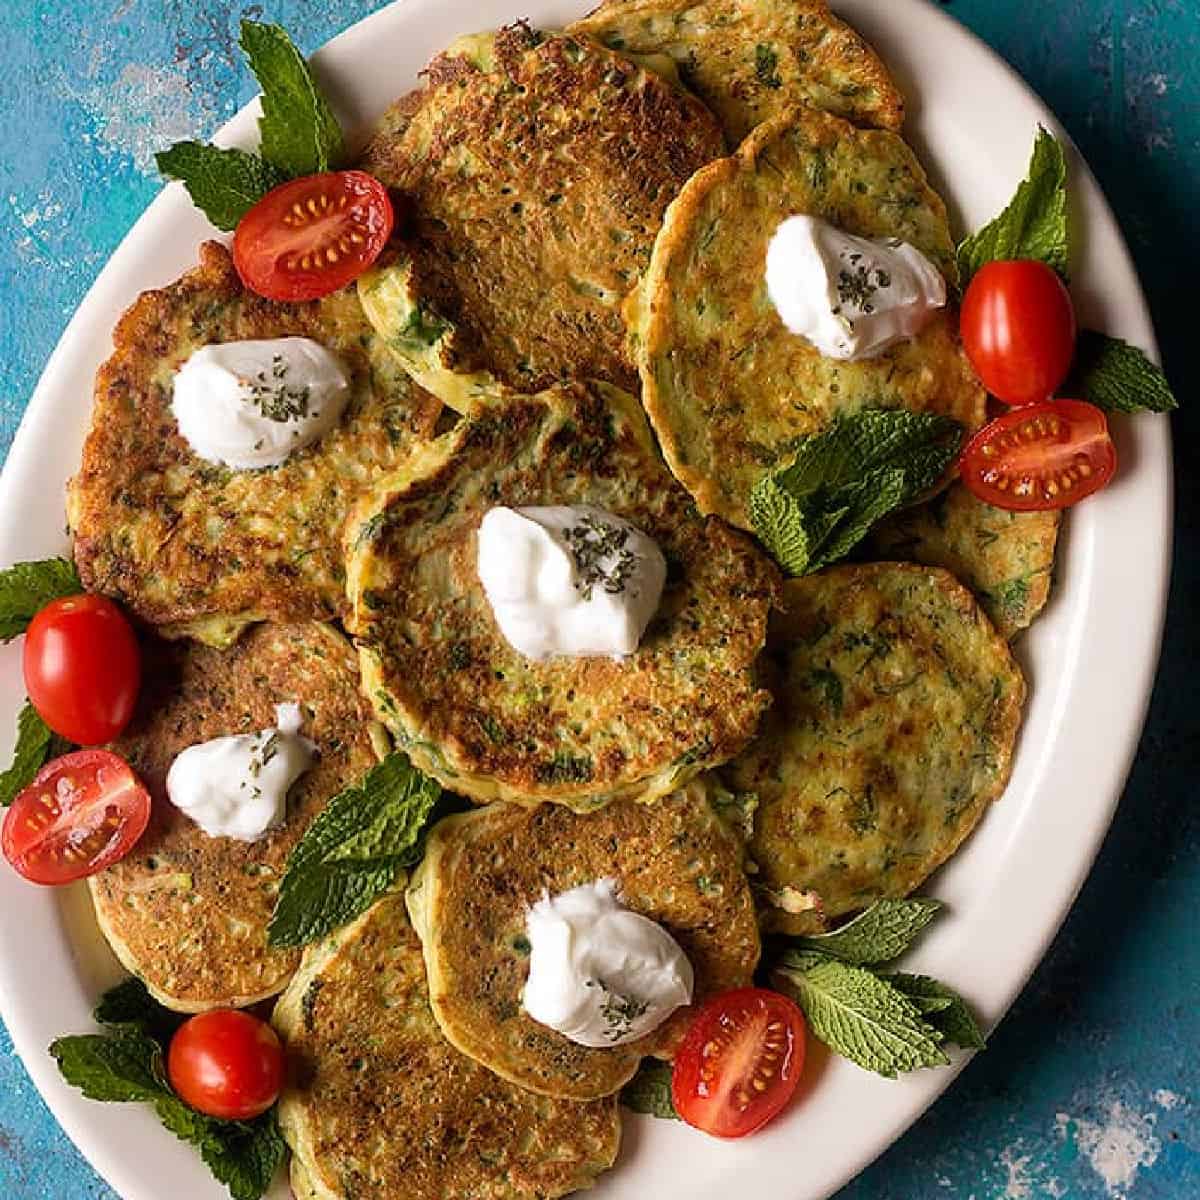 Mucver or zucchini fritters is a classic Turkish dish that's ready in 30 minutes. This recipe calls for fresh zucchini and herbs and it's very simple to make.